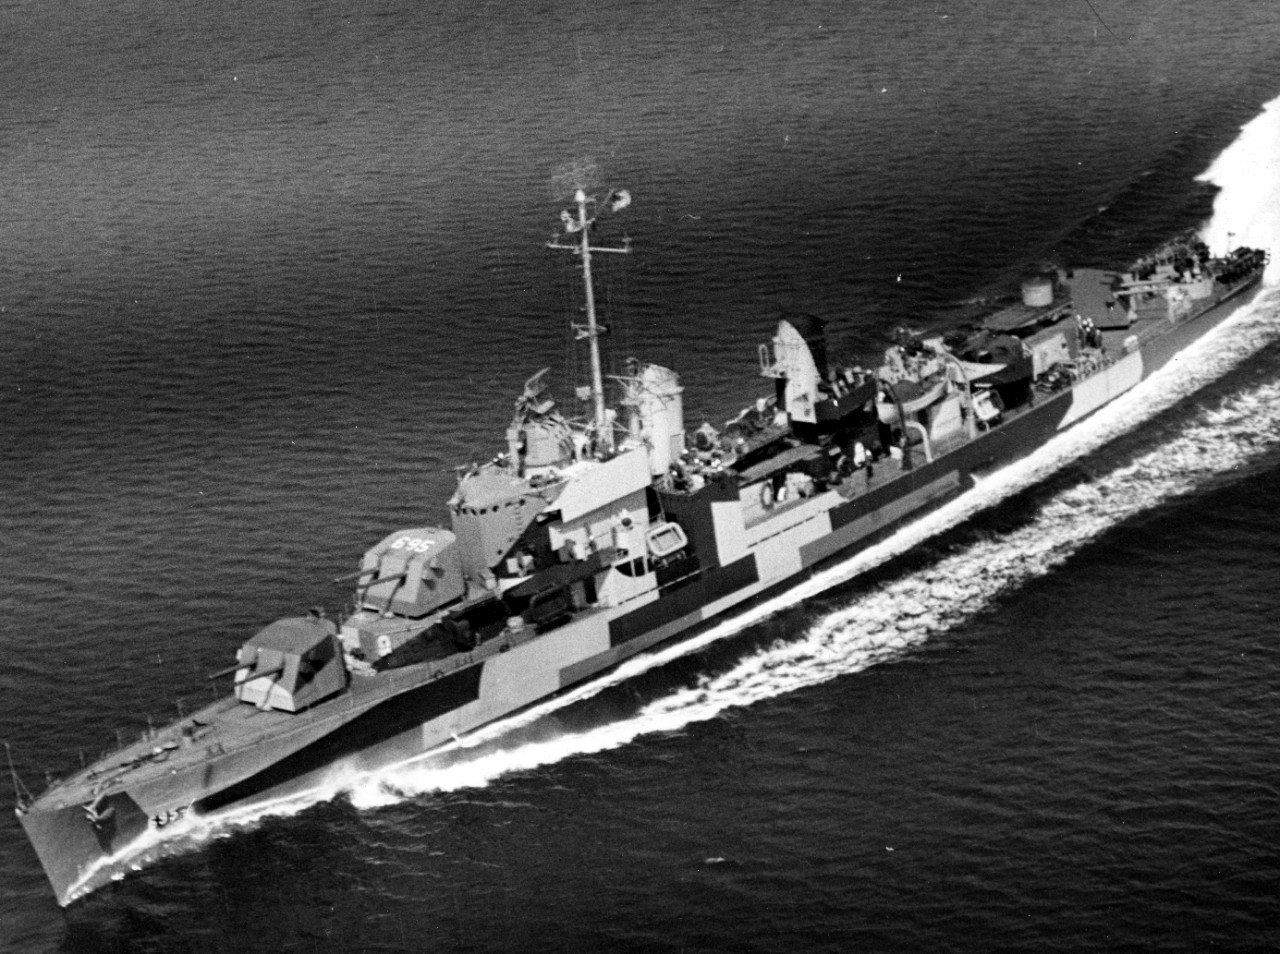 Cooper at speed, 24 April 1944, in a view that shows her port side Measure 32 Design 3D camouflage. The darkest color is Dull Black, the medium color Ocean Gray 5-O (which is also carried onto areas of the otherwise Deck Blue 20-B), and the lightest color is Light Gray 5-L. Note the modified bridge and identification number 695 on the crown of Mt. 52. (U.S. Navy Photograph 80-G-225110, National Archives and Records Administration, Still Pictures Division, College Park, Md.)